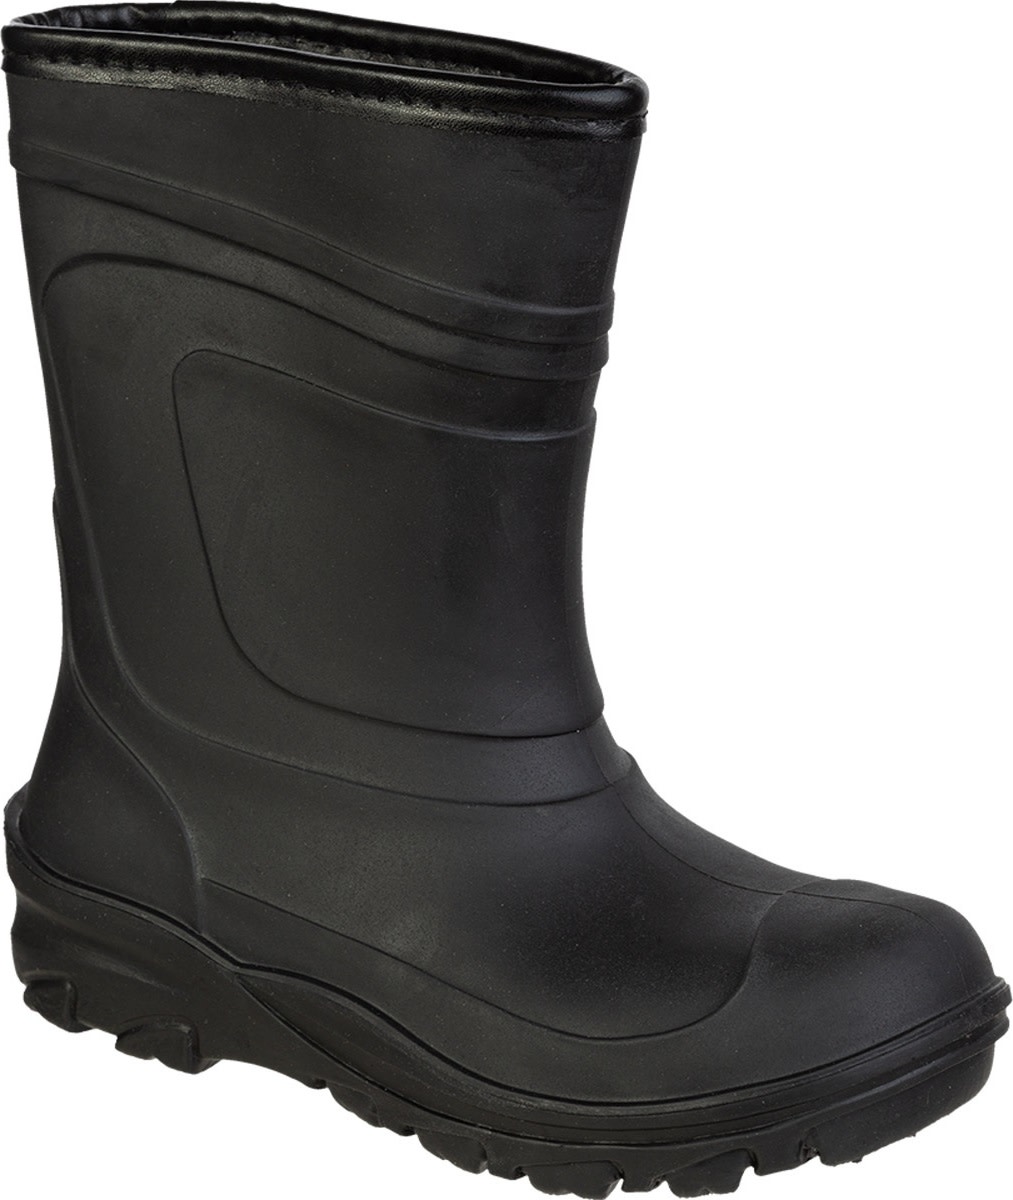 Outnorth FianThermo | Black Boot Buy Boot FianThermo | Black Kids\' Kids\' here